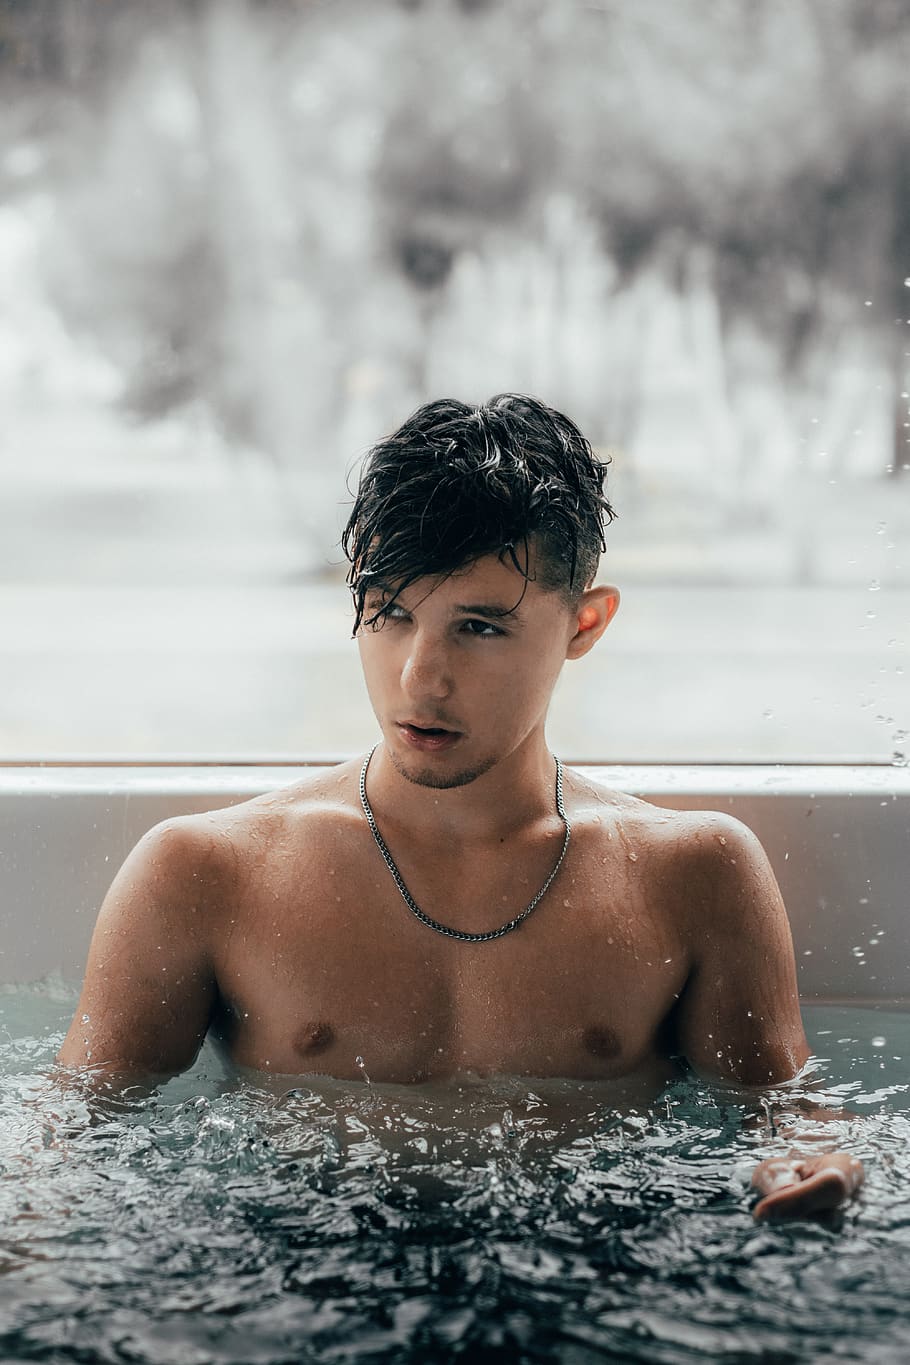 man wearing black necklace in pool, person, human, tub, hot tub